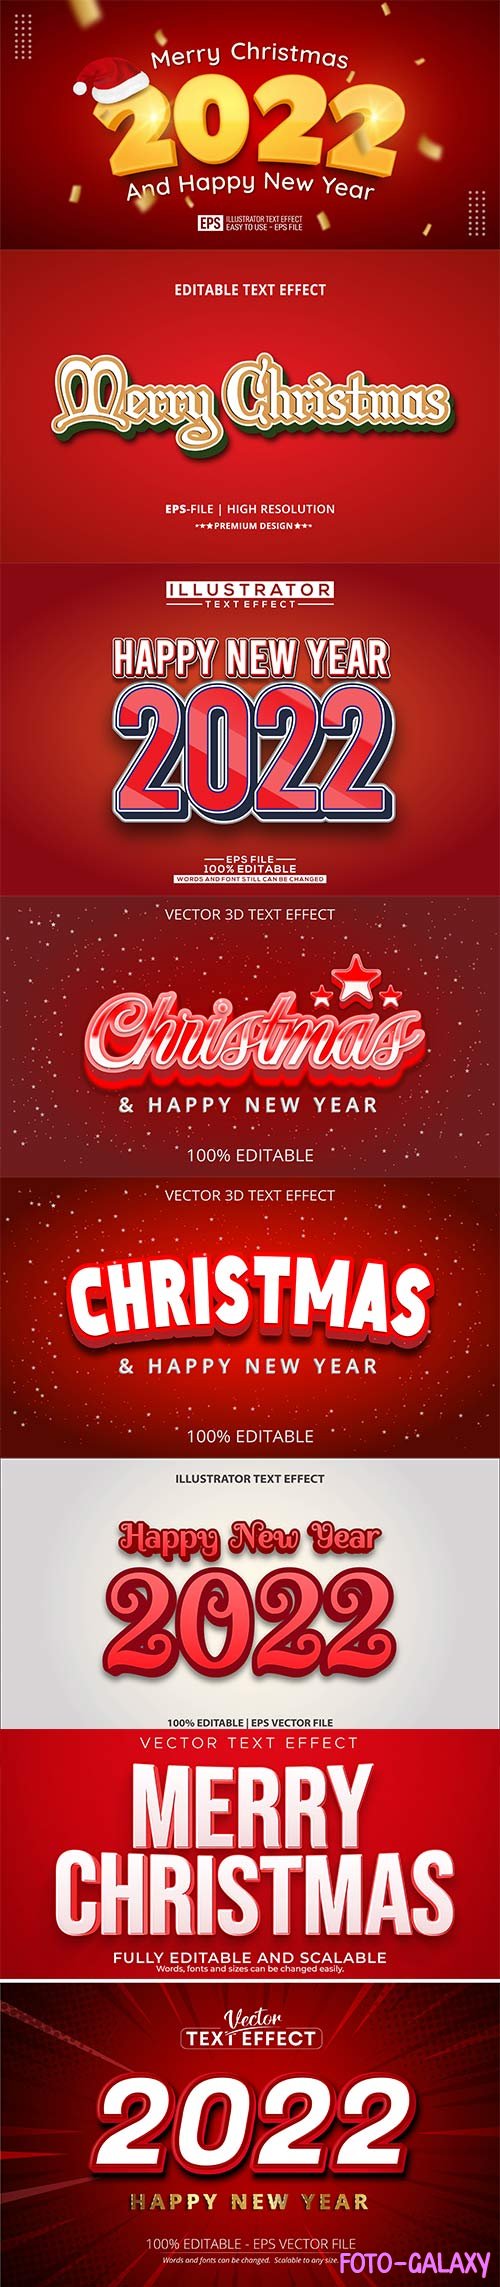 2022 New year and christmas editable text effect vector vol 34